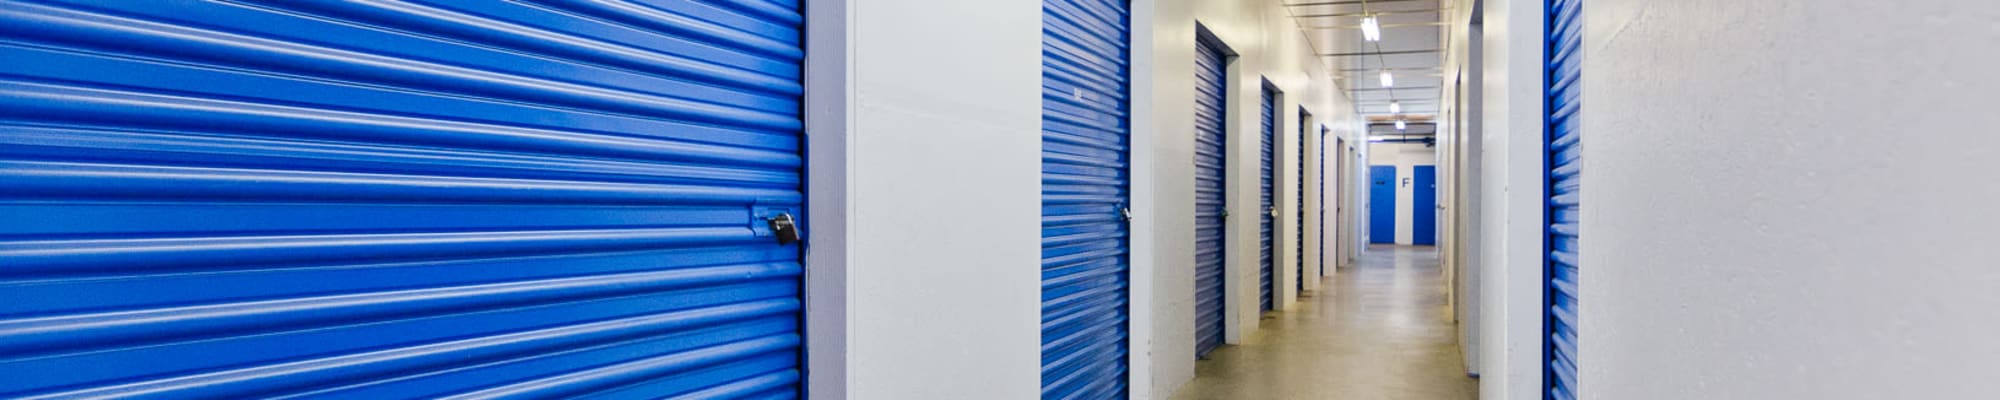 Self storage management at A-American Self Storage in Los Angeles, California